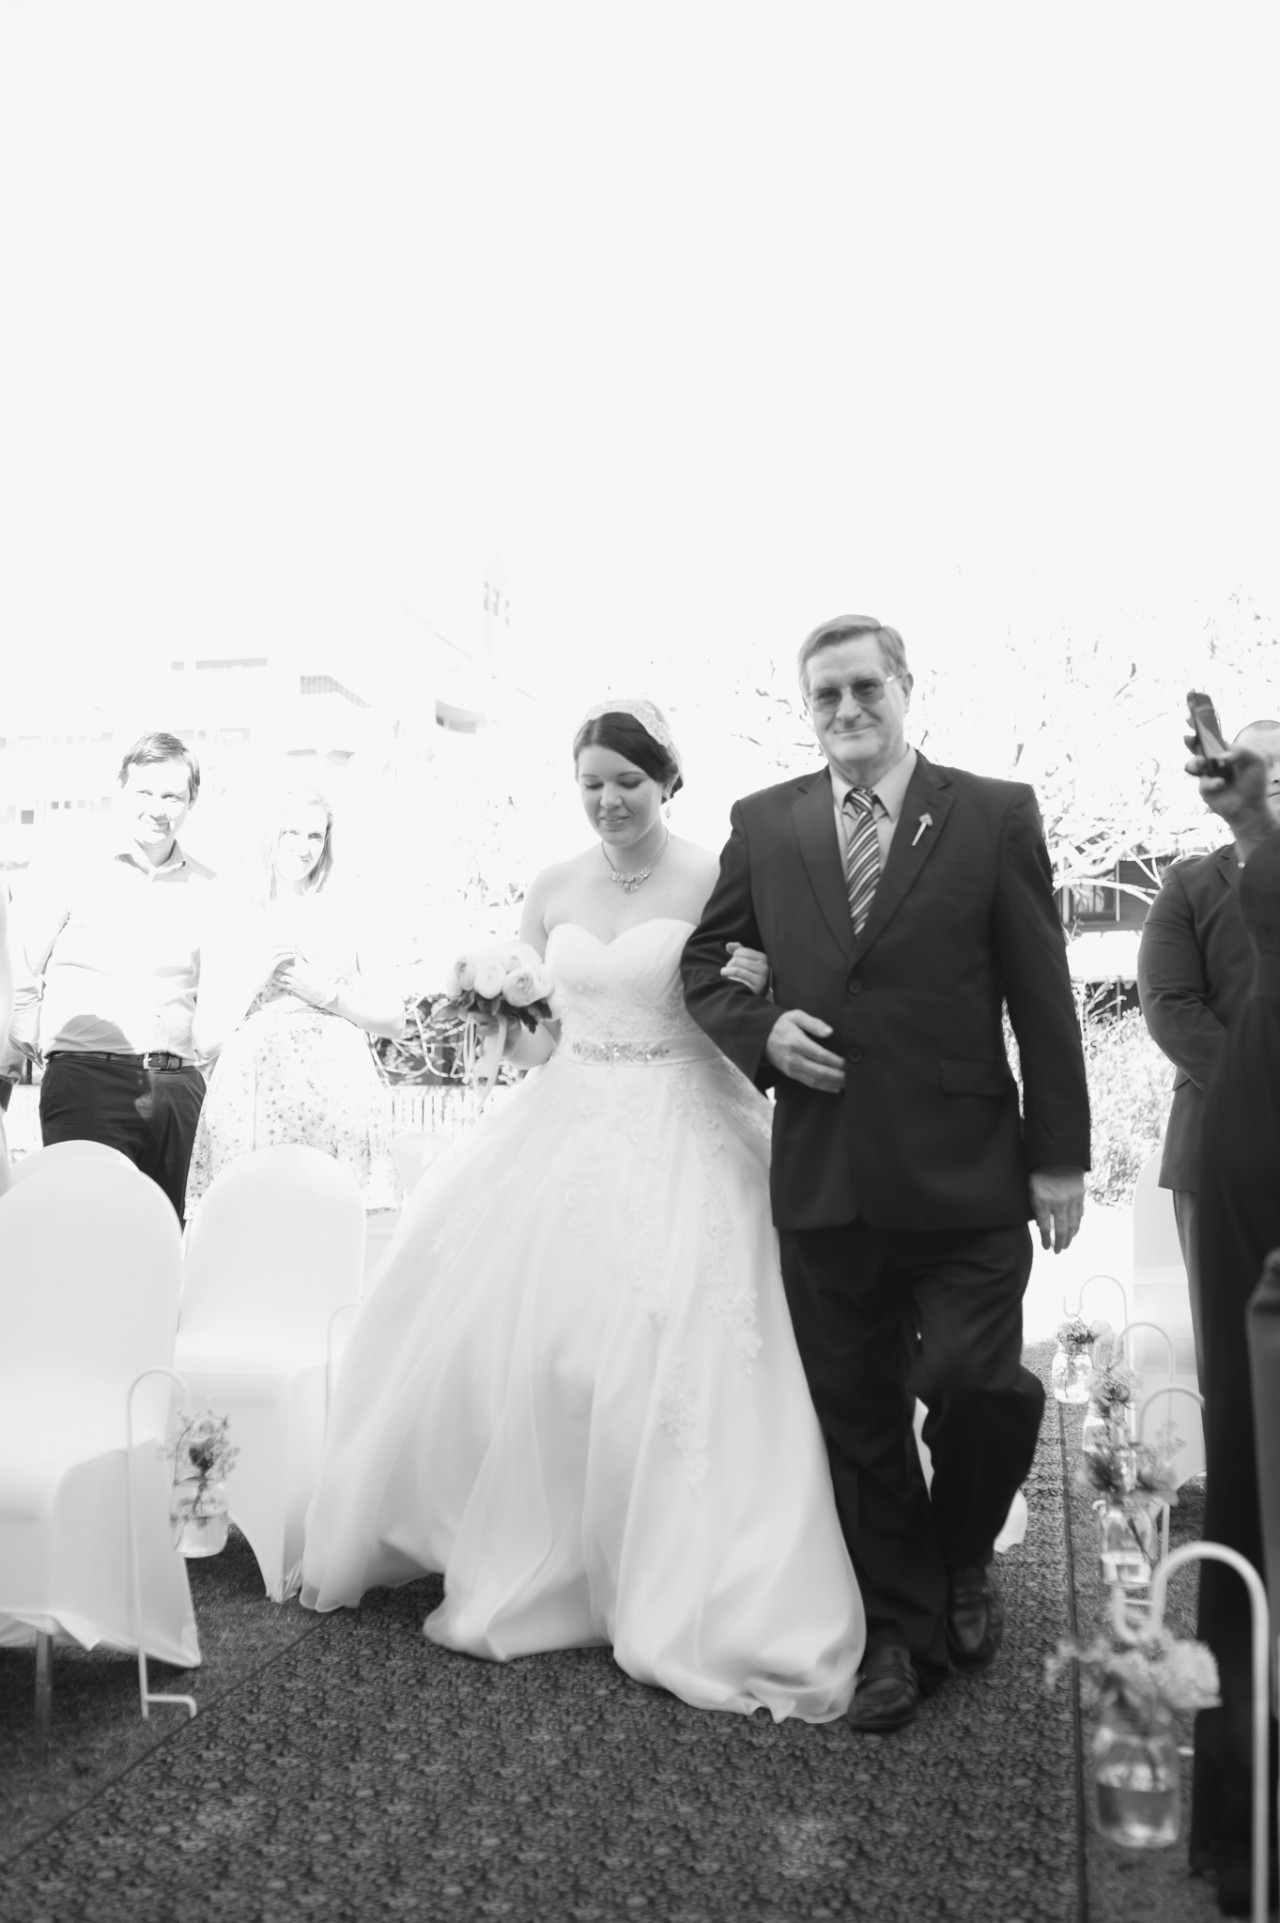 Father of the bride walking his daughter down the aisle at Shafston House, Kangaroo Point